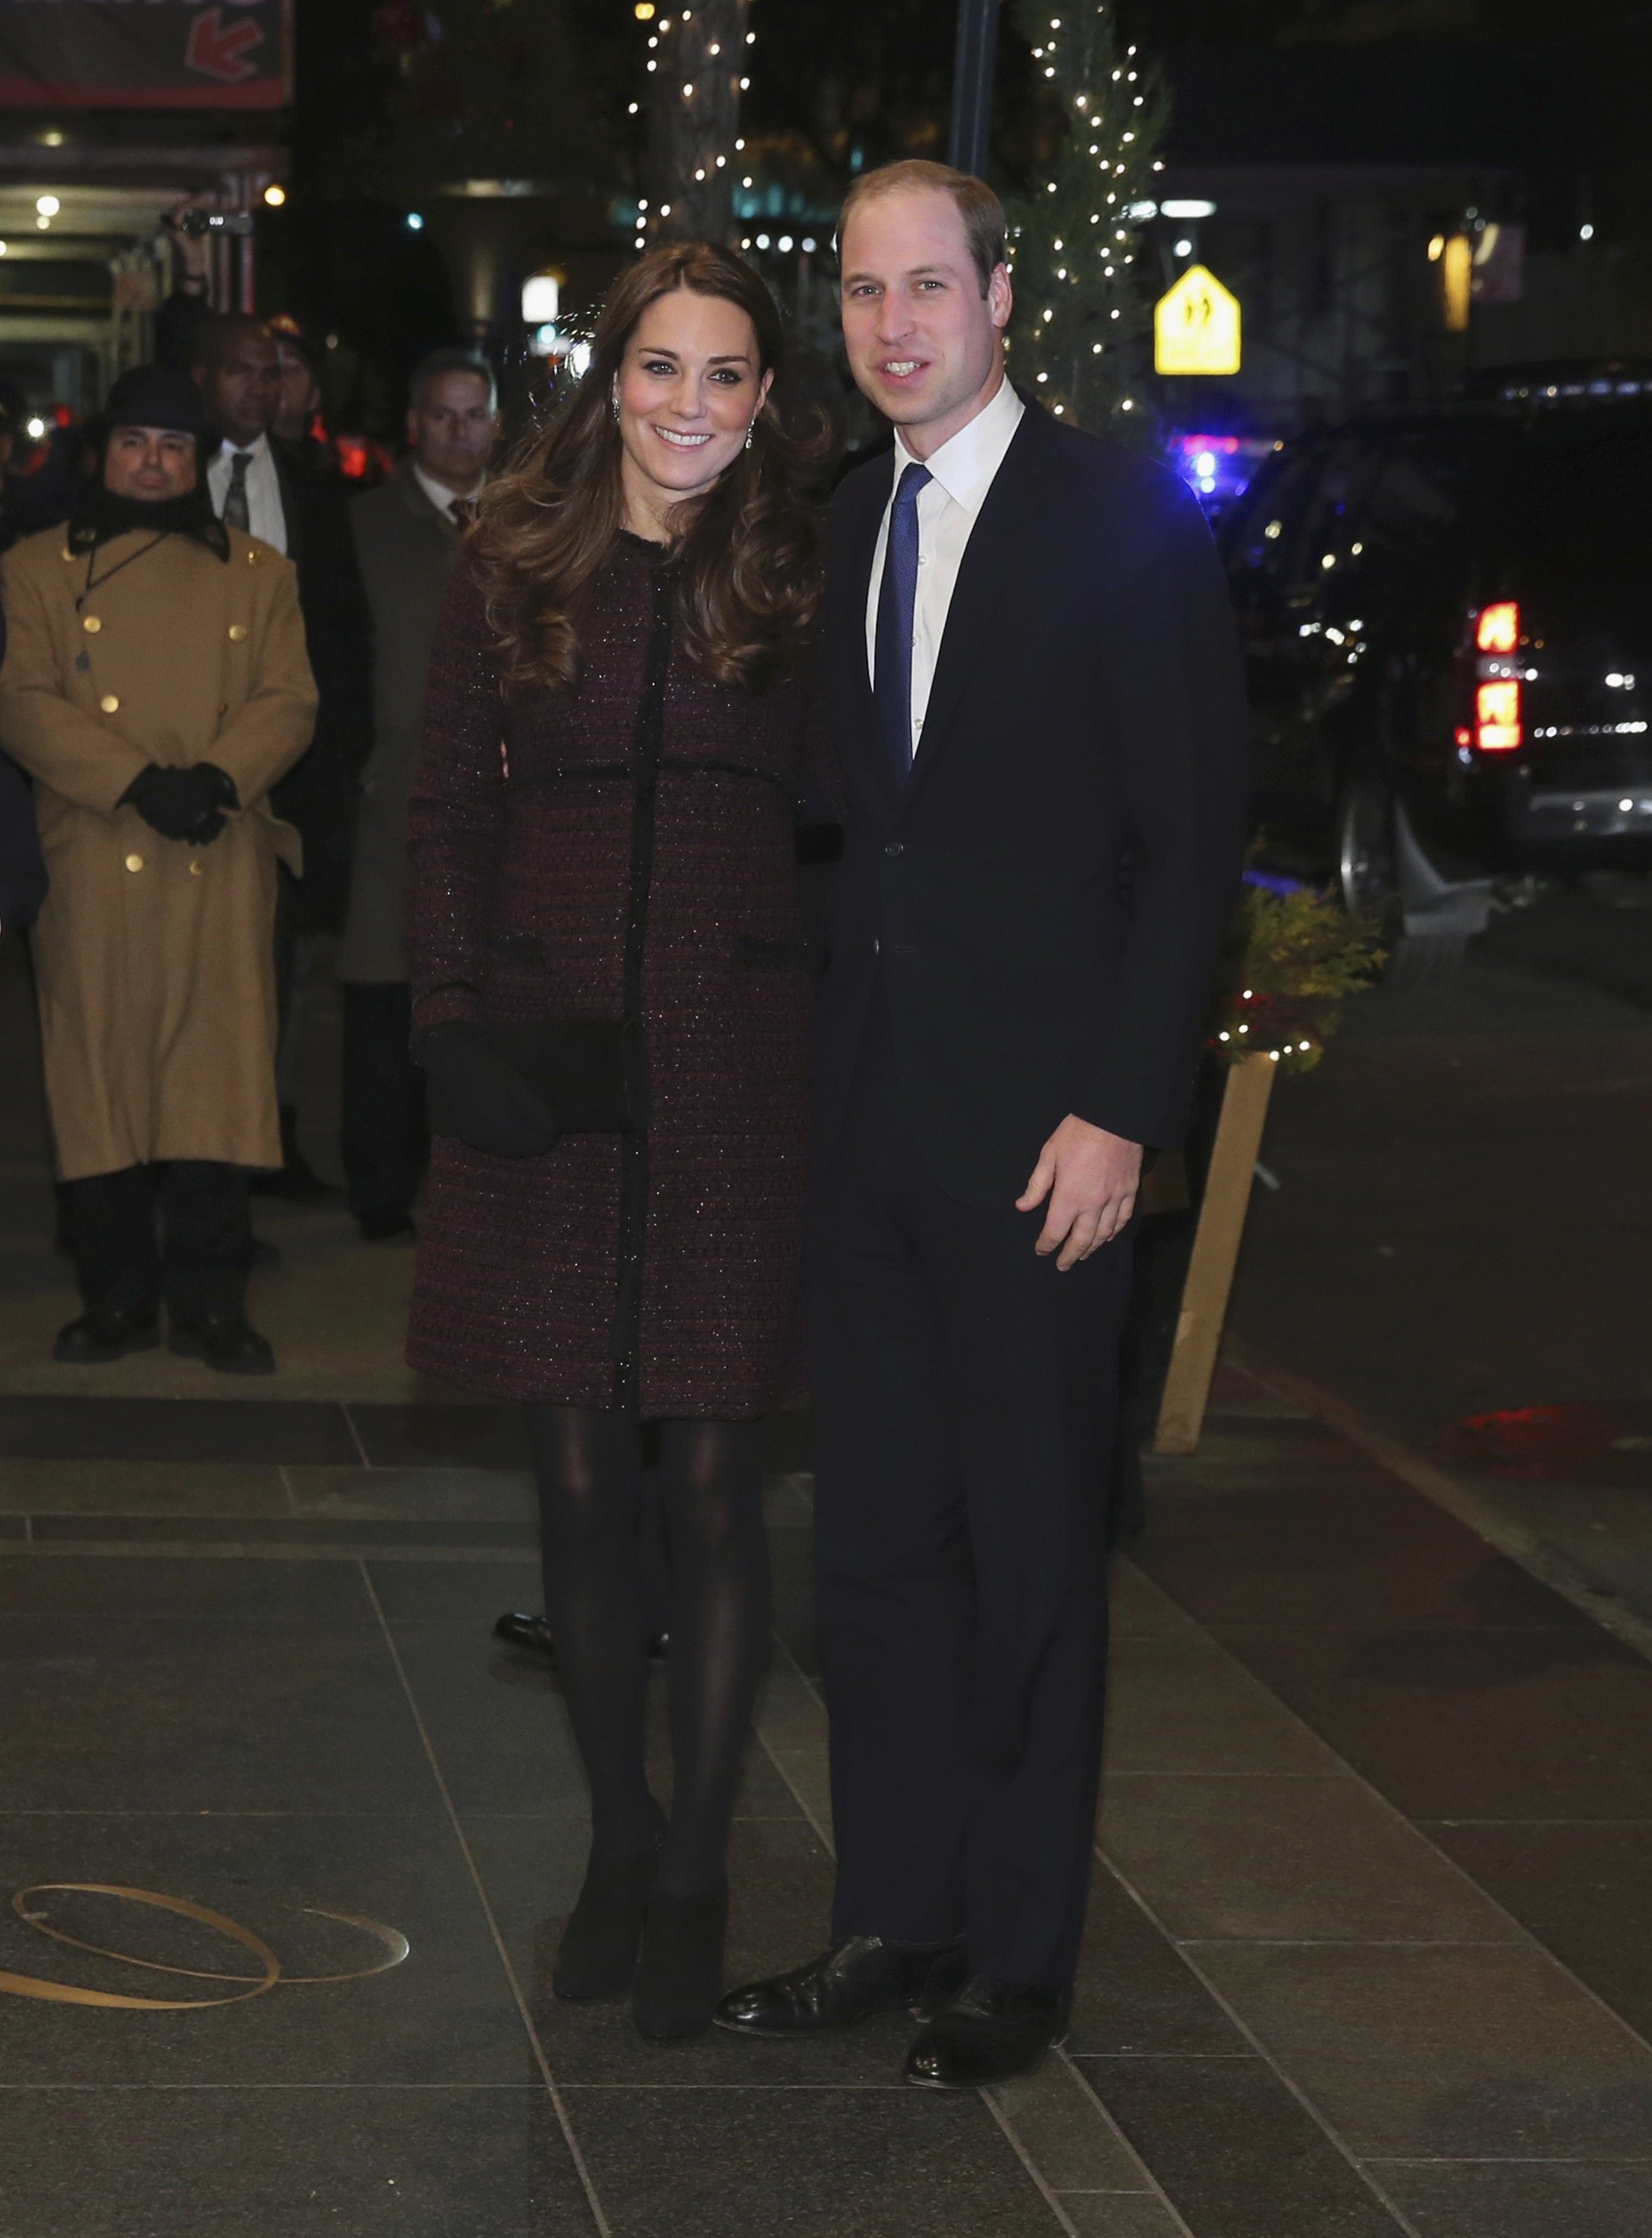 Britain's Prince William, Duke of Cambridge, and his wife Catherine, Duchess of Cambridge, arrive at the Carlyle hotel in New York